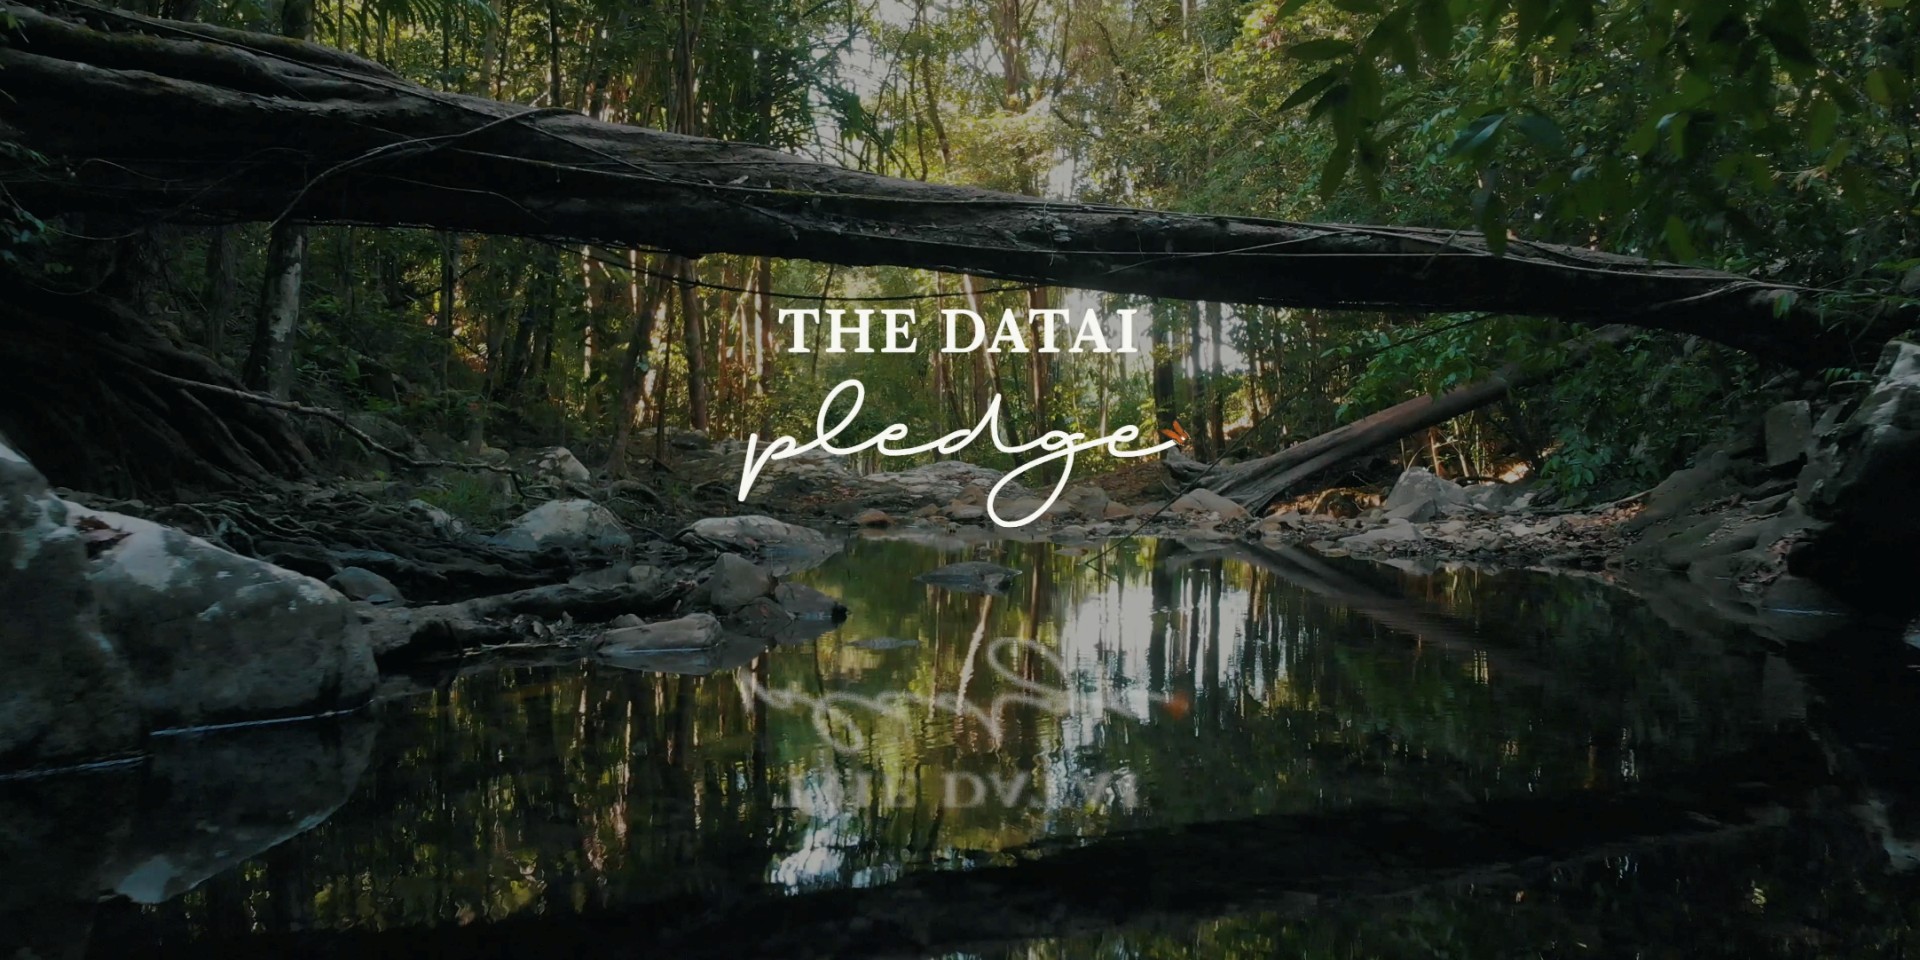 The Datai Pledge Overview Video